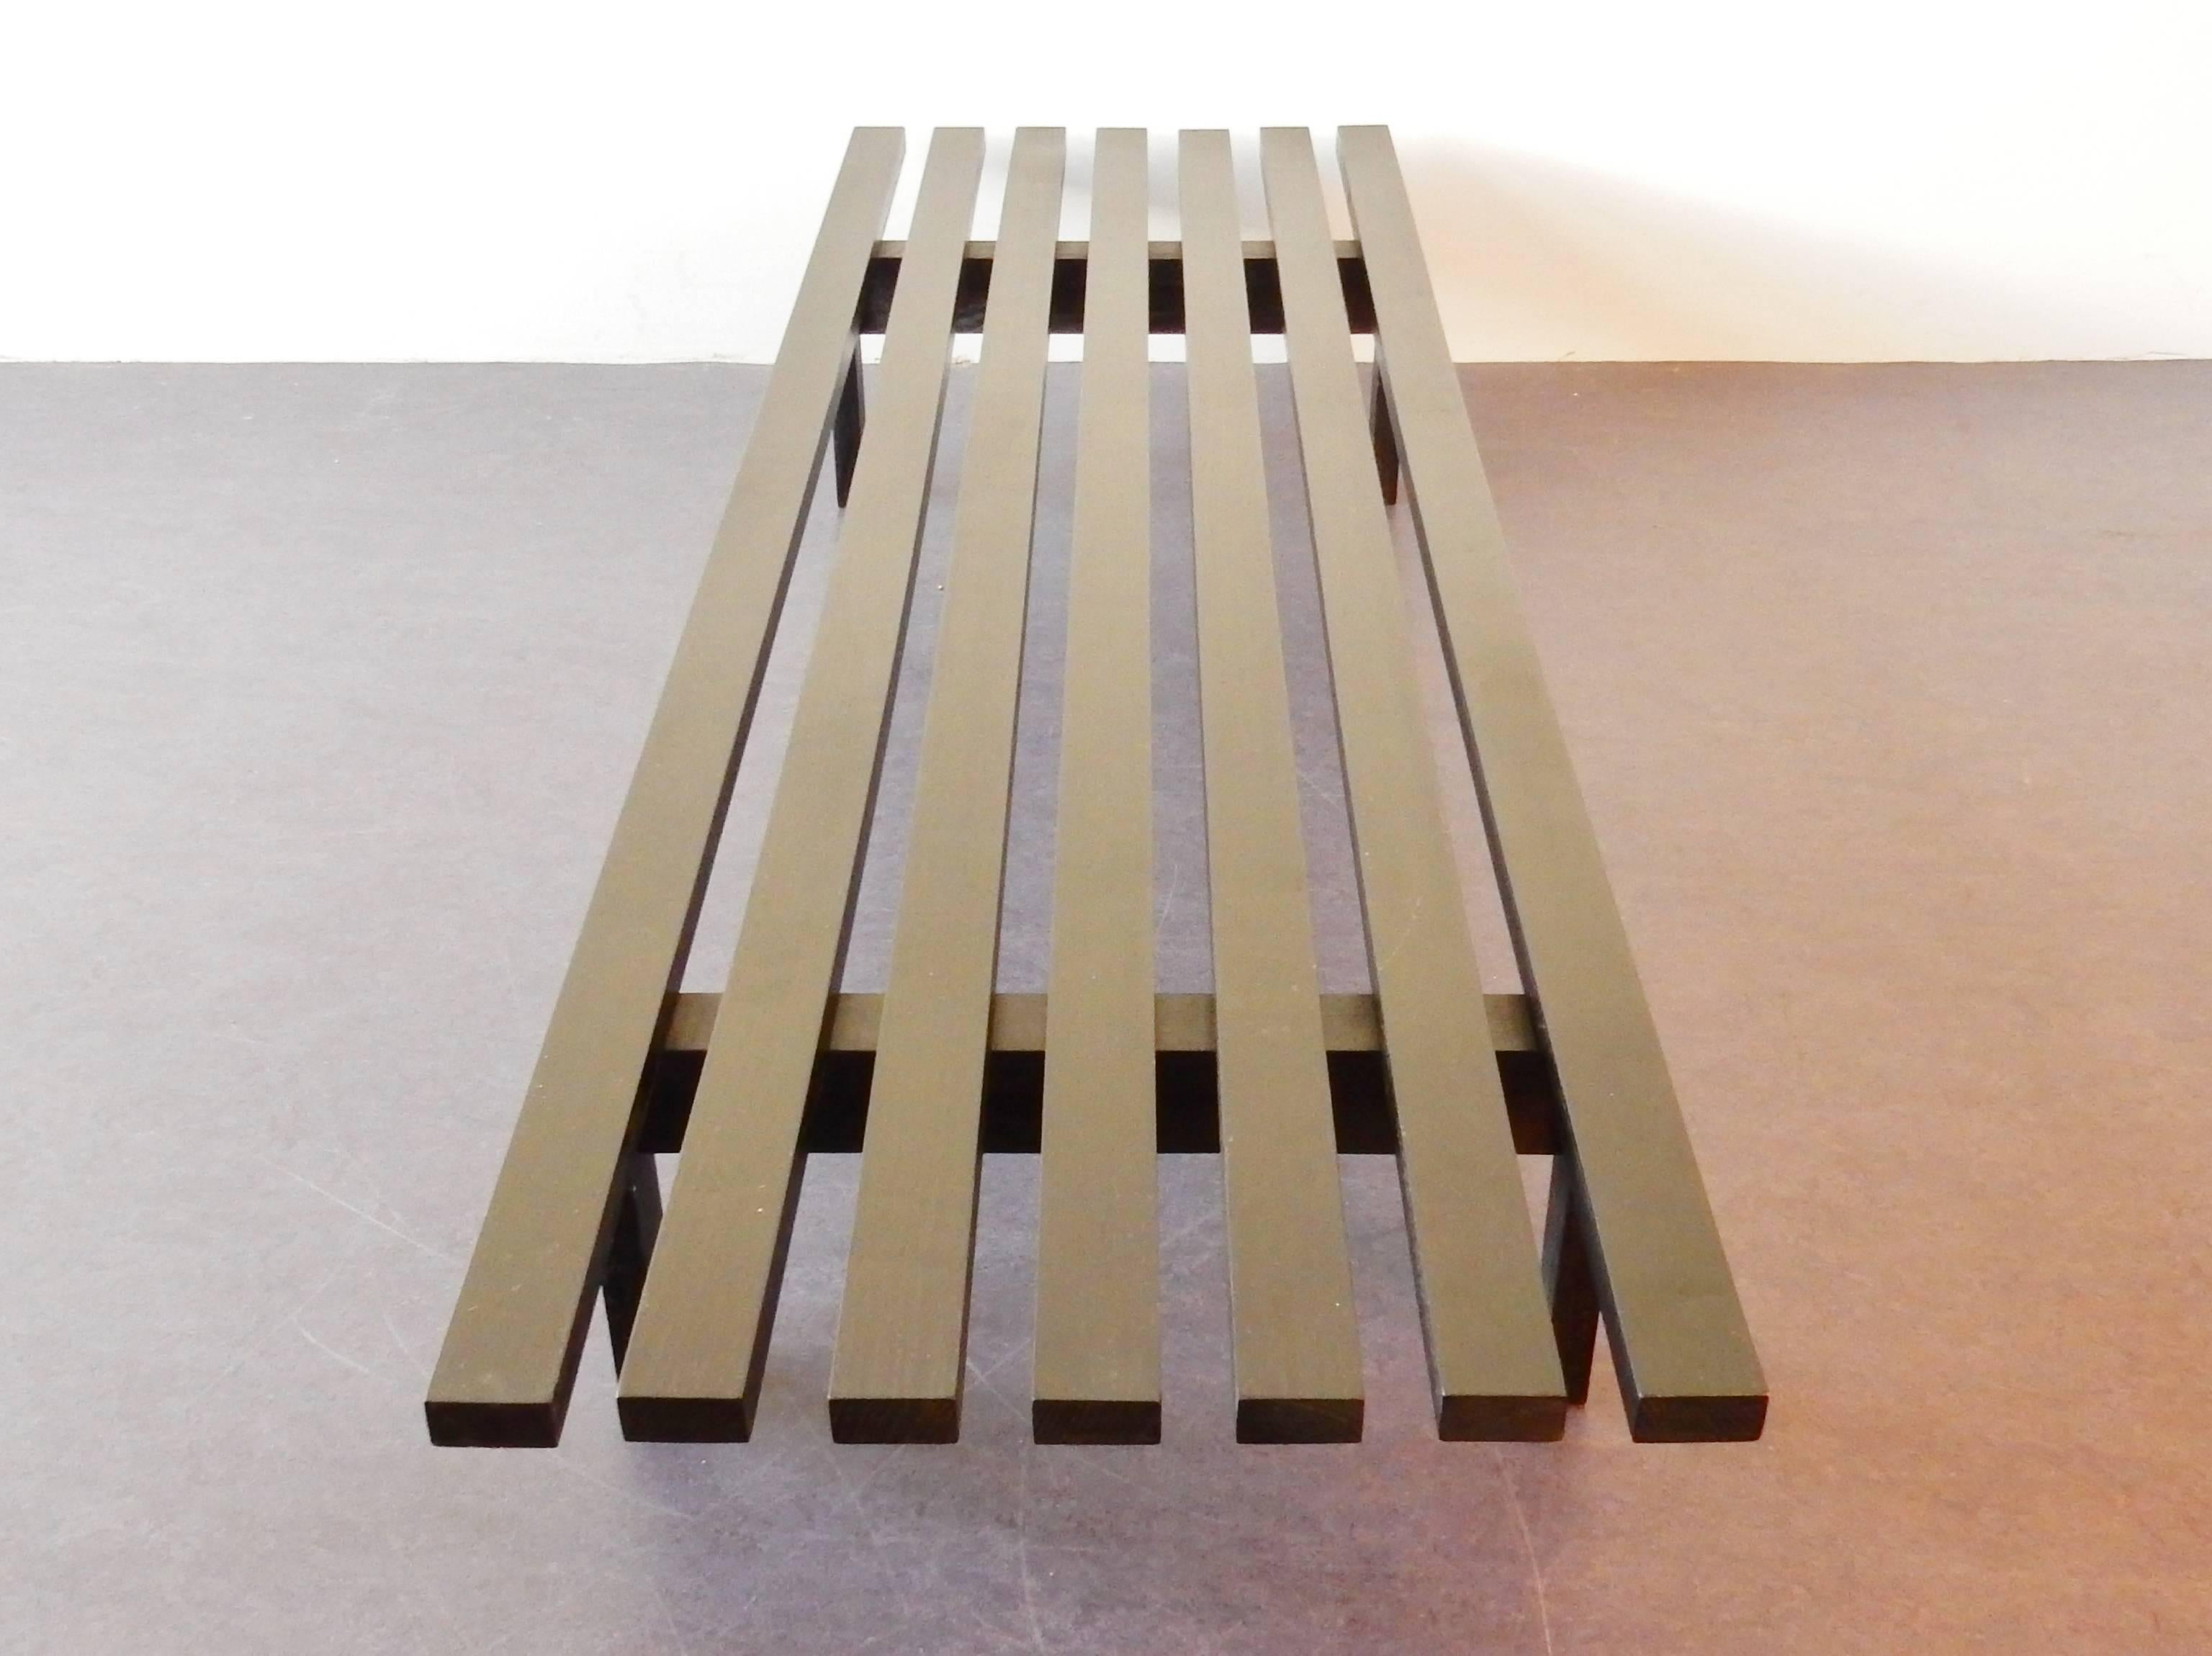 The largest slat sofa by Martin Visser is the 'bz82'. This particular one is of black lackered maple wood. It is in a very good and original condition. Originally designed in 1960-1961 for the 'Stedelijk Museum' in Amsterdam.